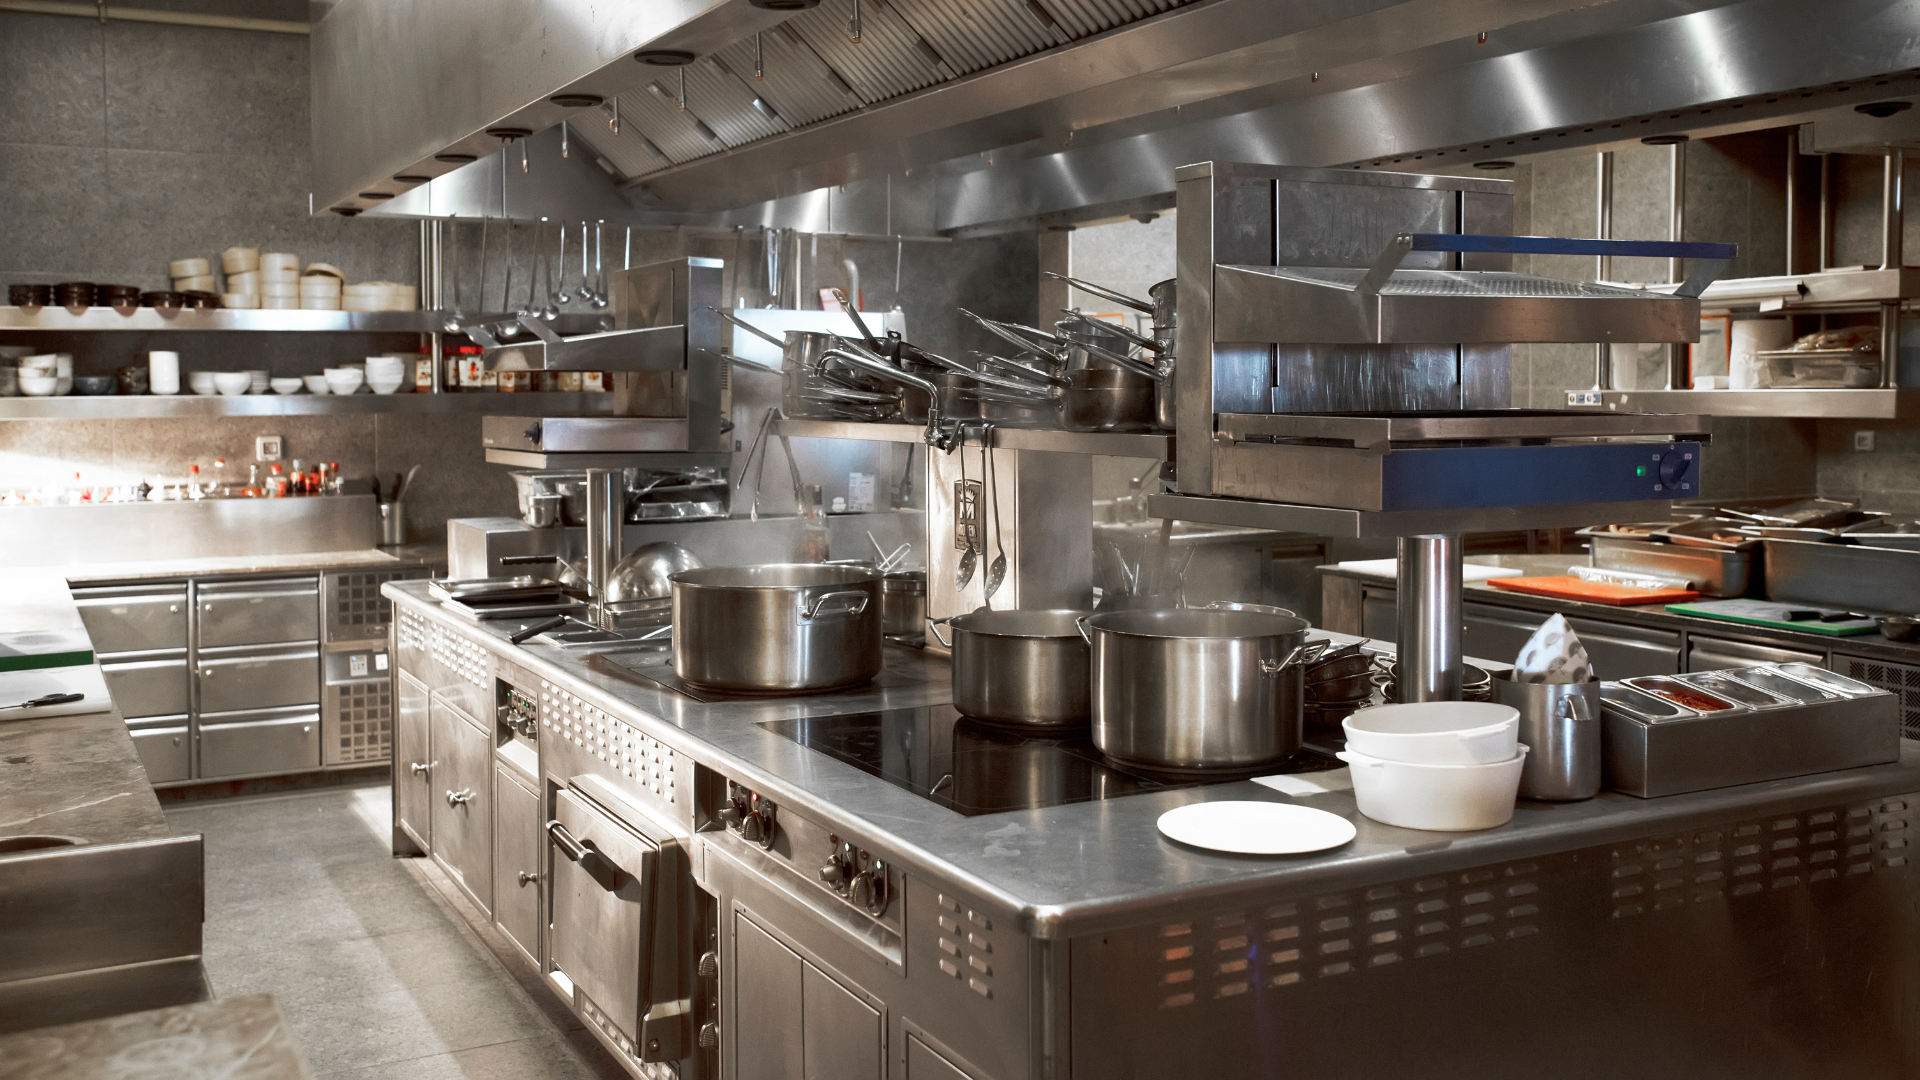 An image of a professional kitchen with some rented equipment